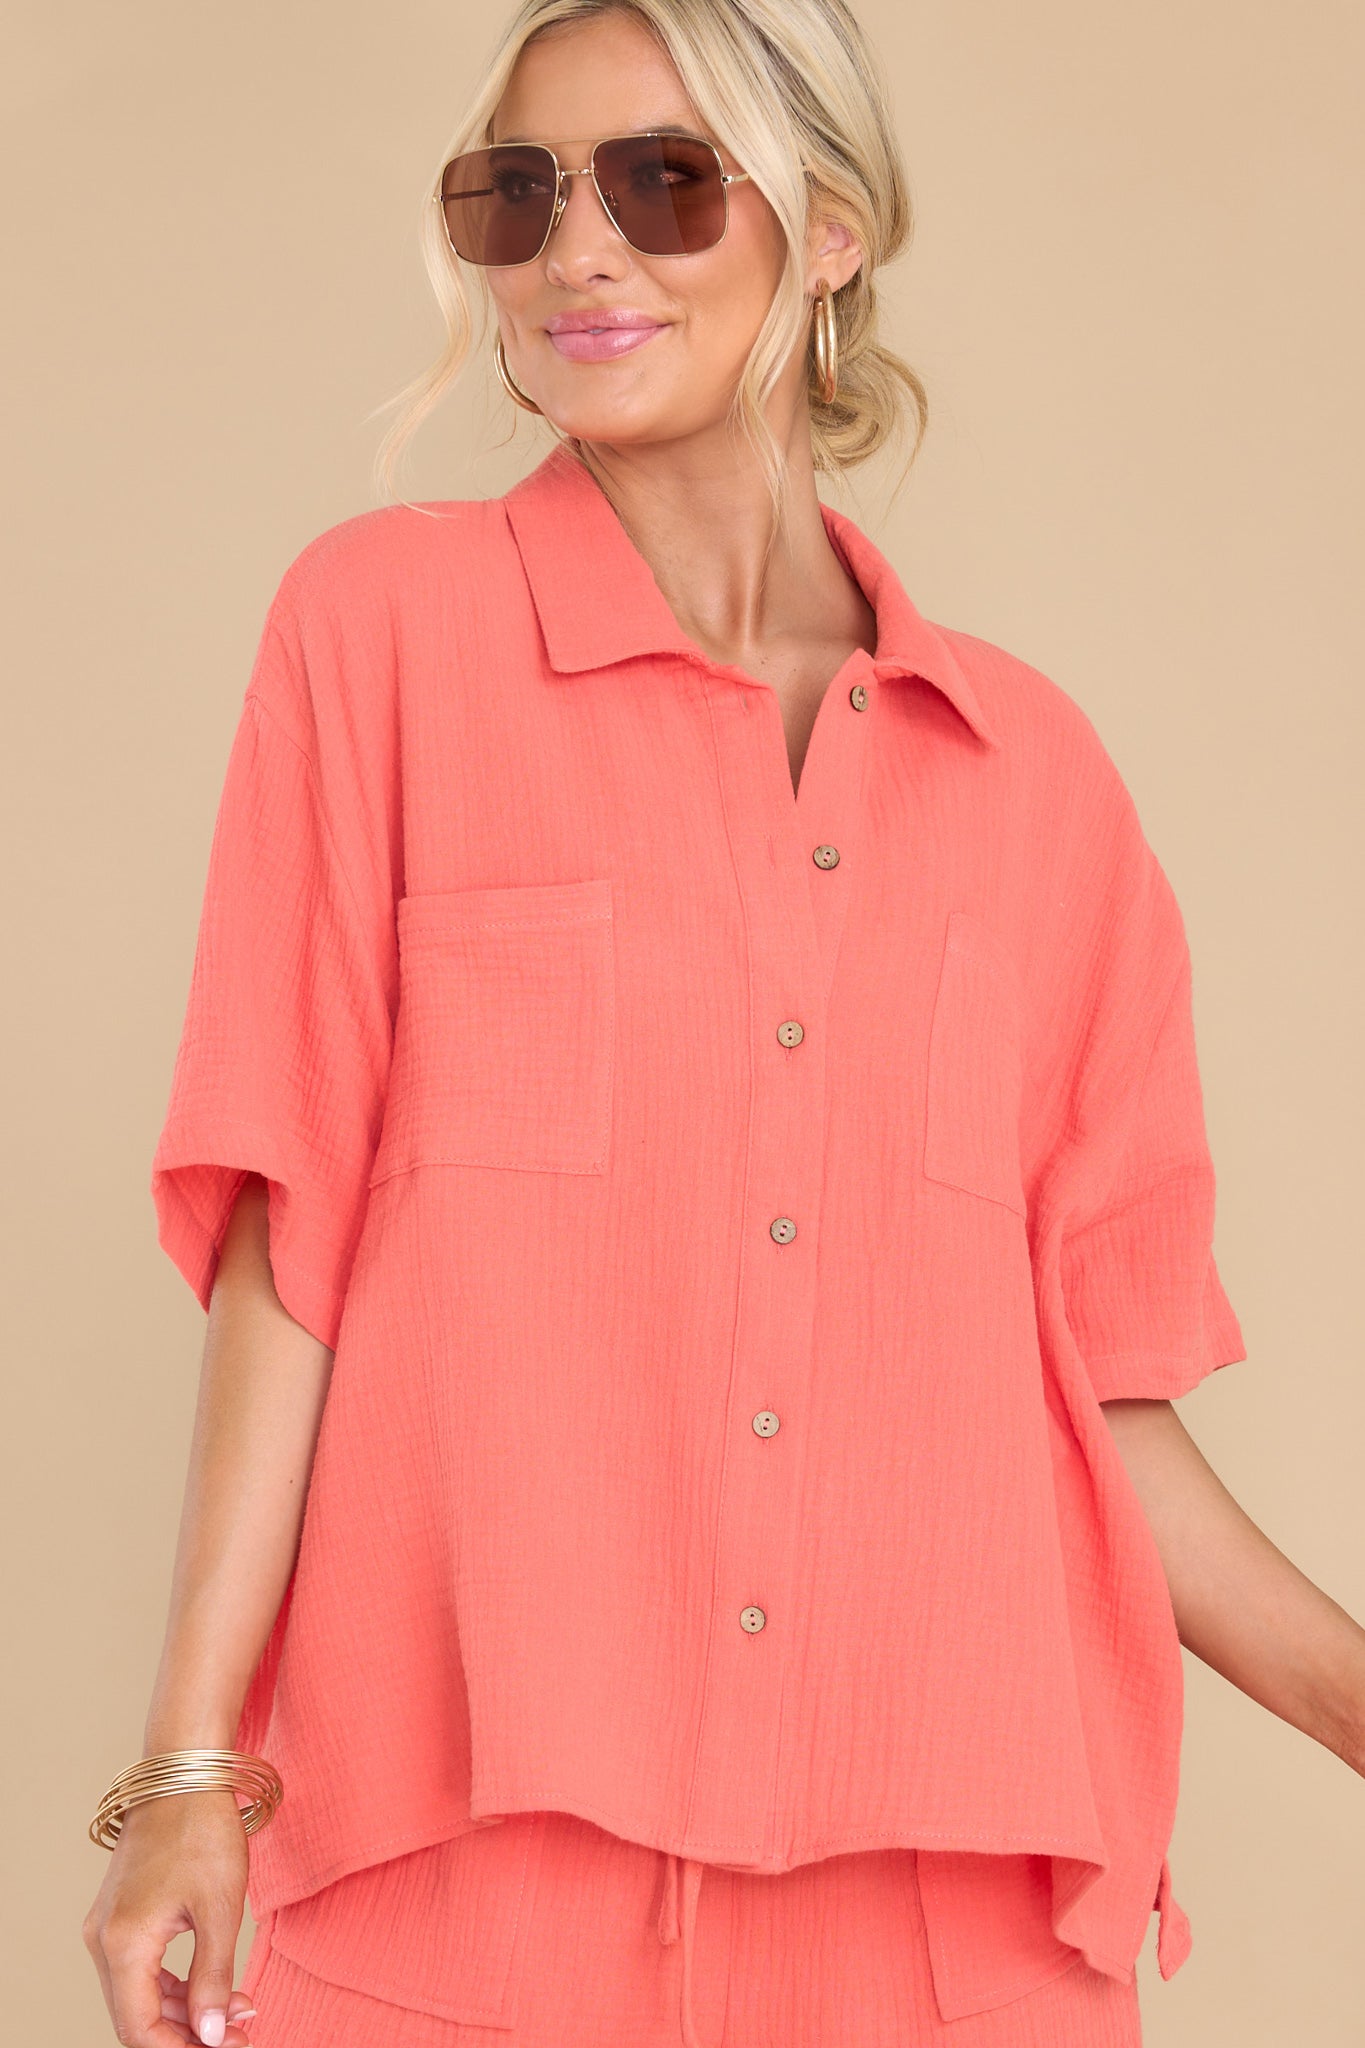 The Brightest Days Coral Gauze Top - Red Dress